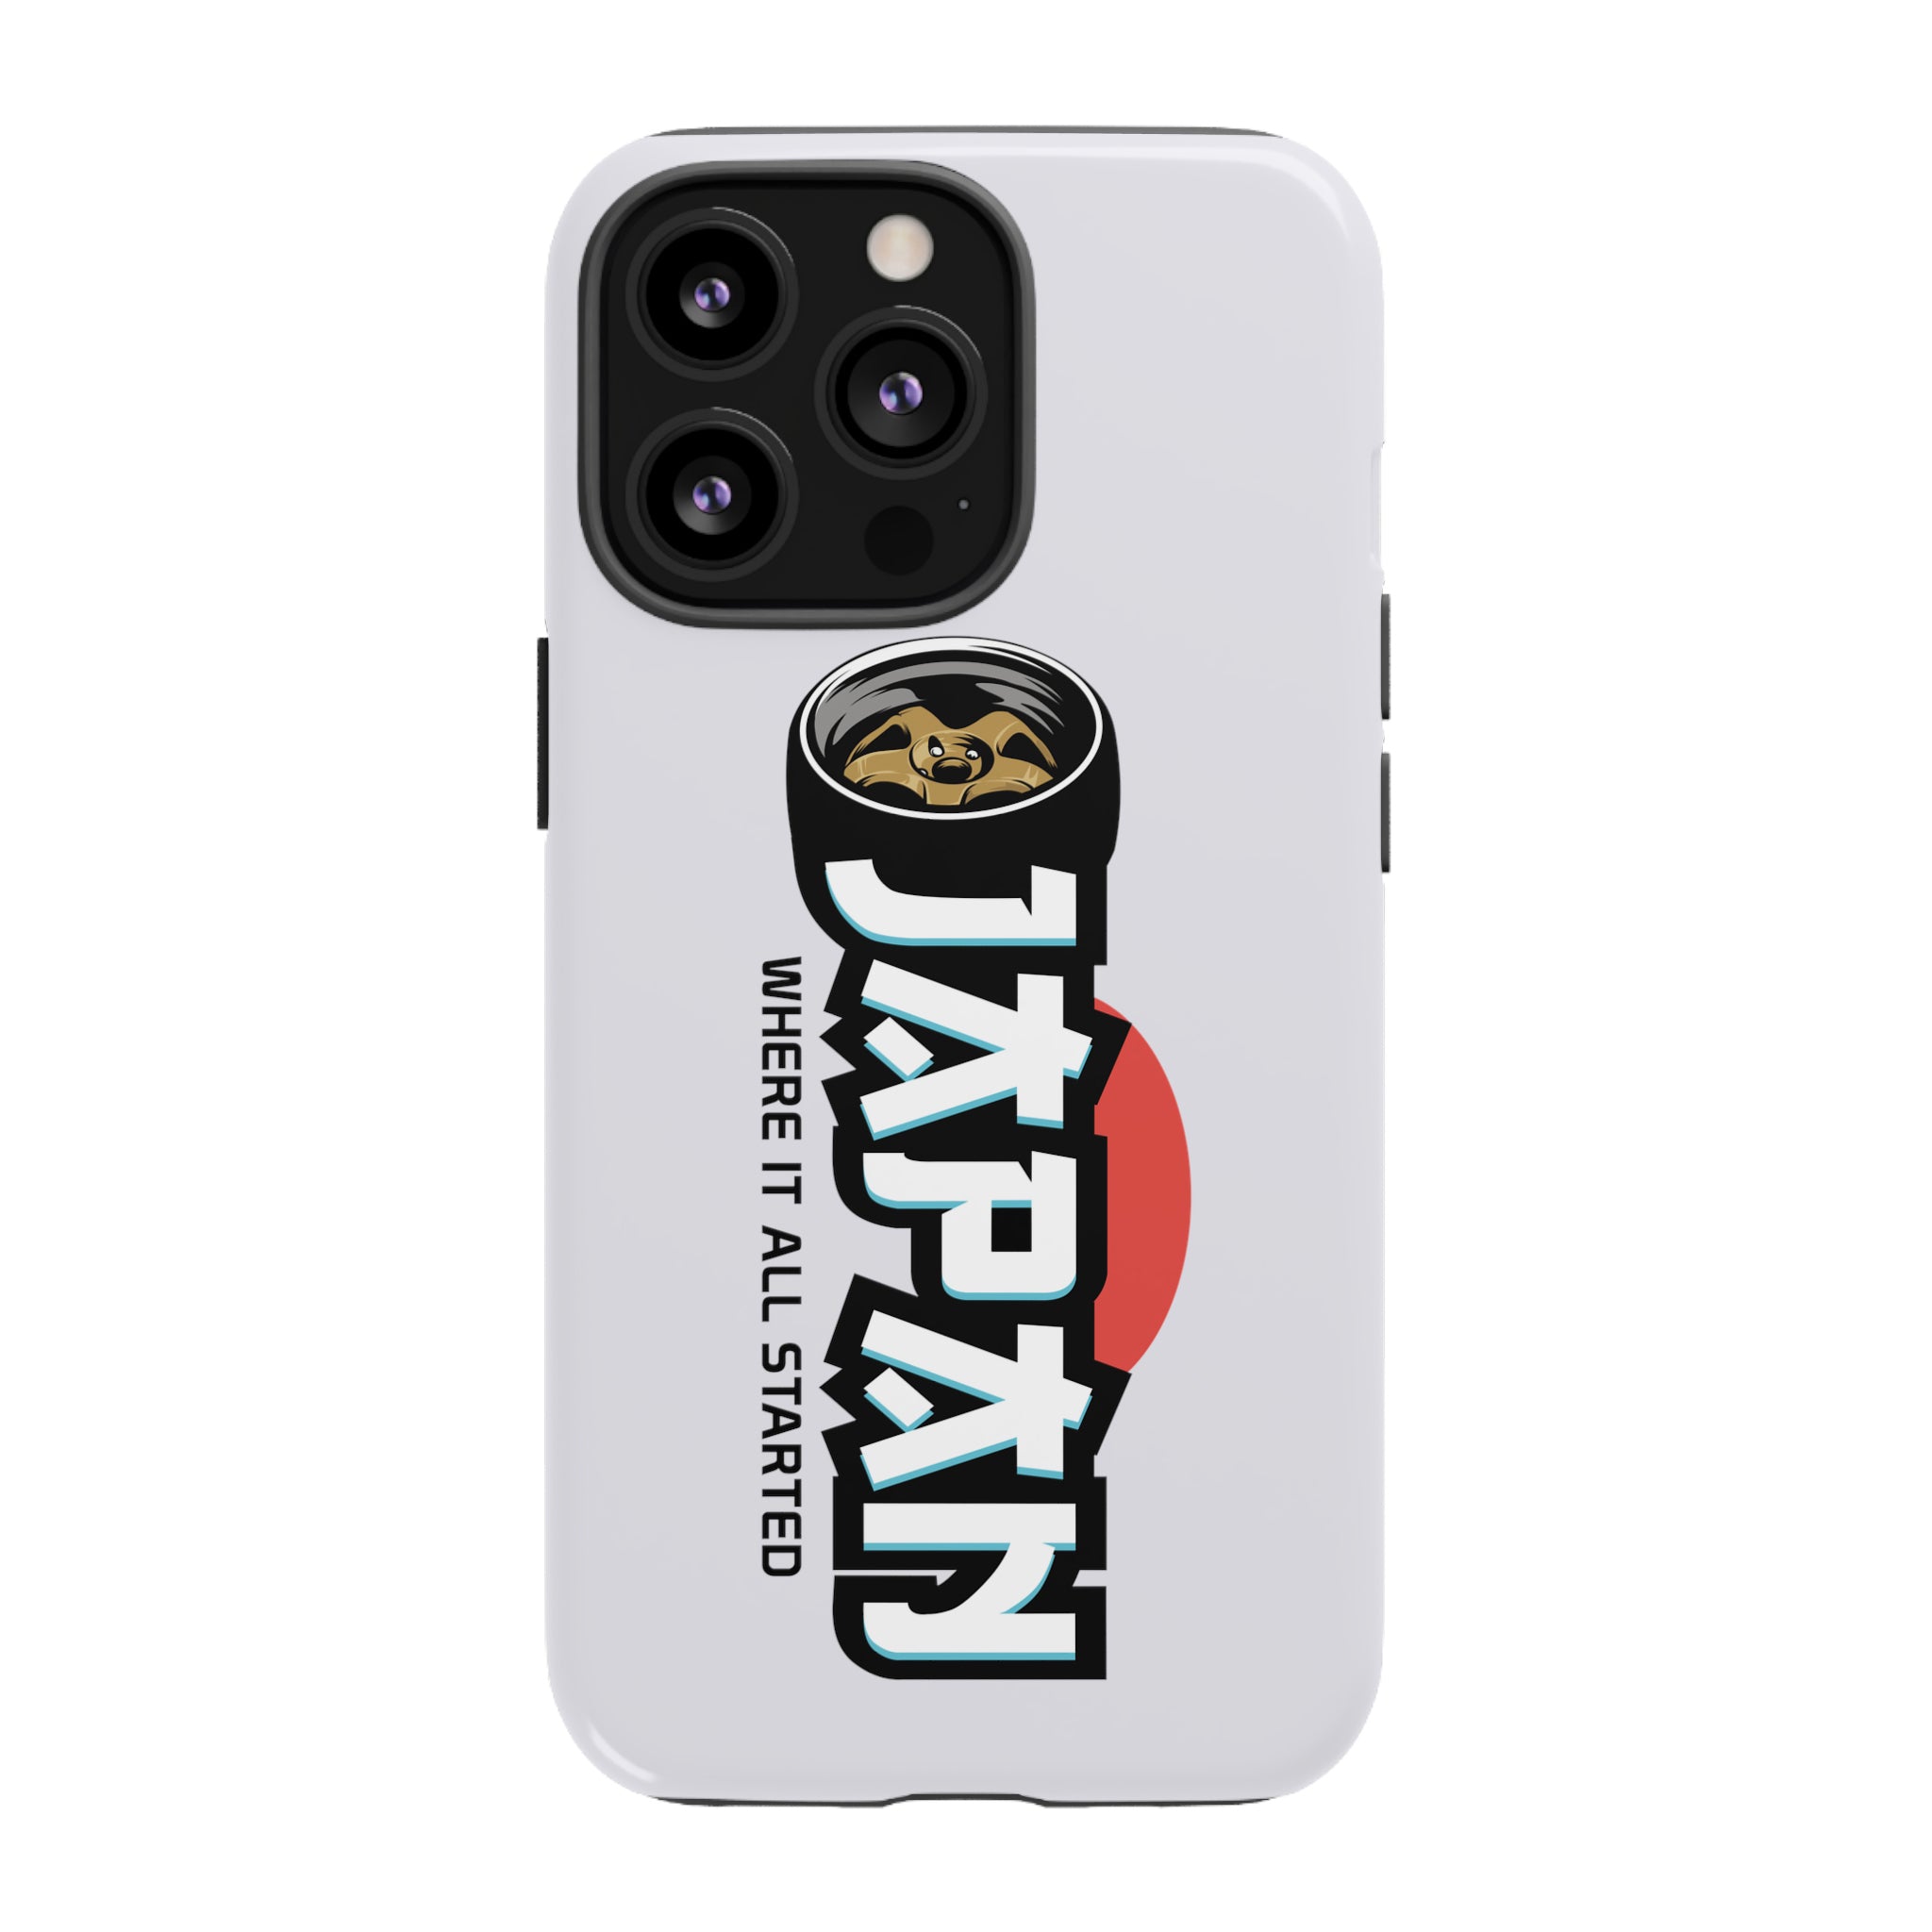 Japan - Where It All Started - Phone Case